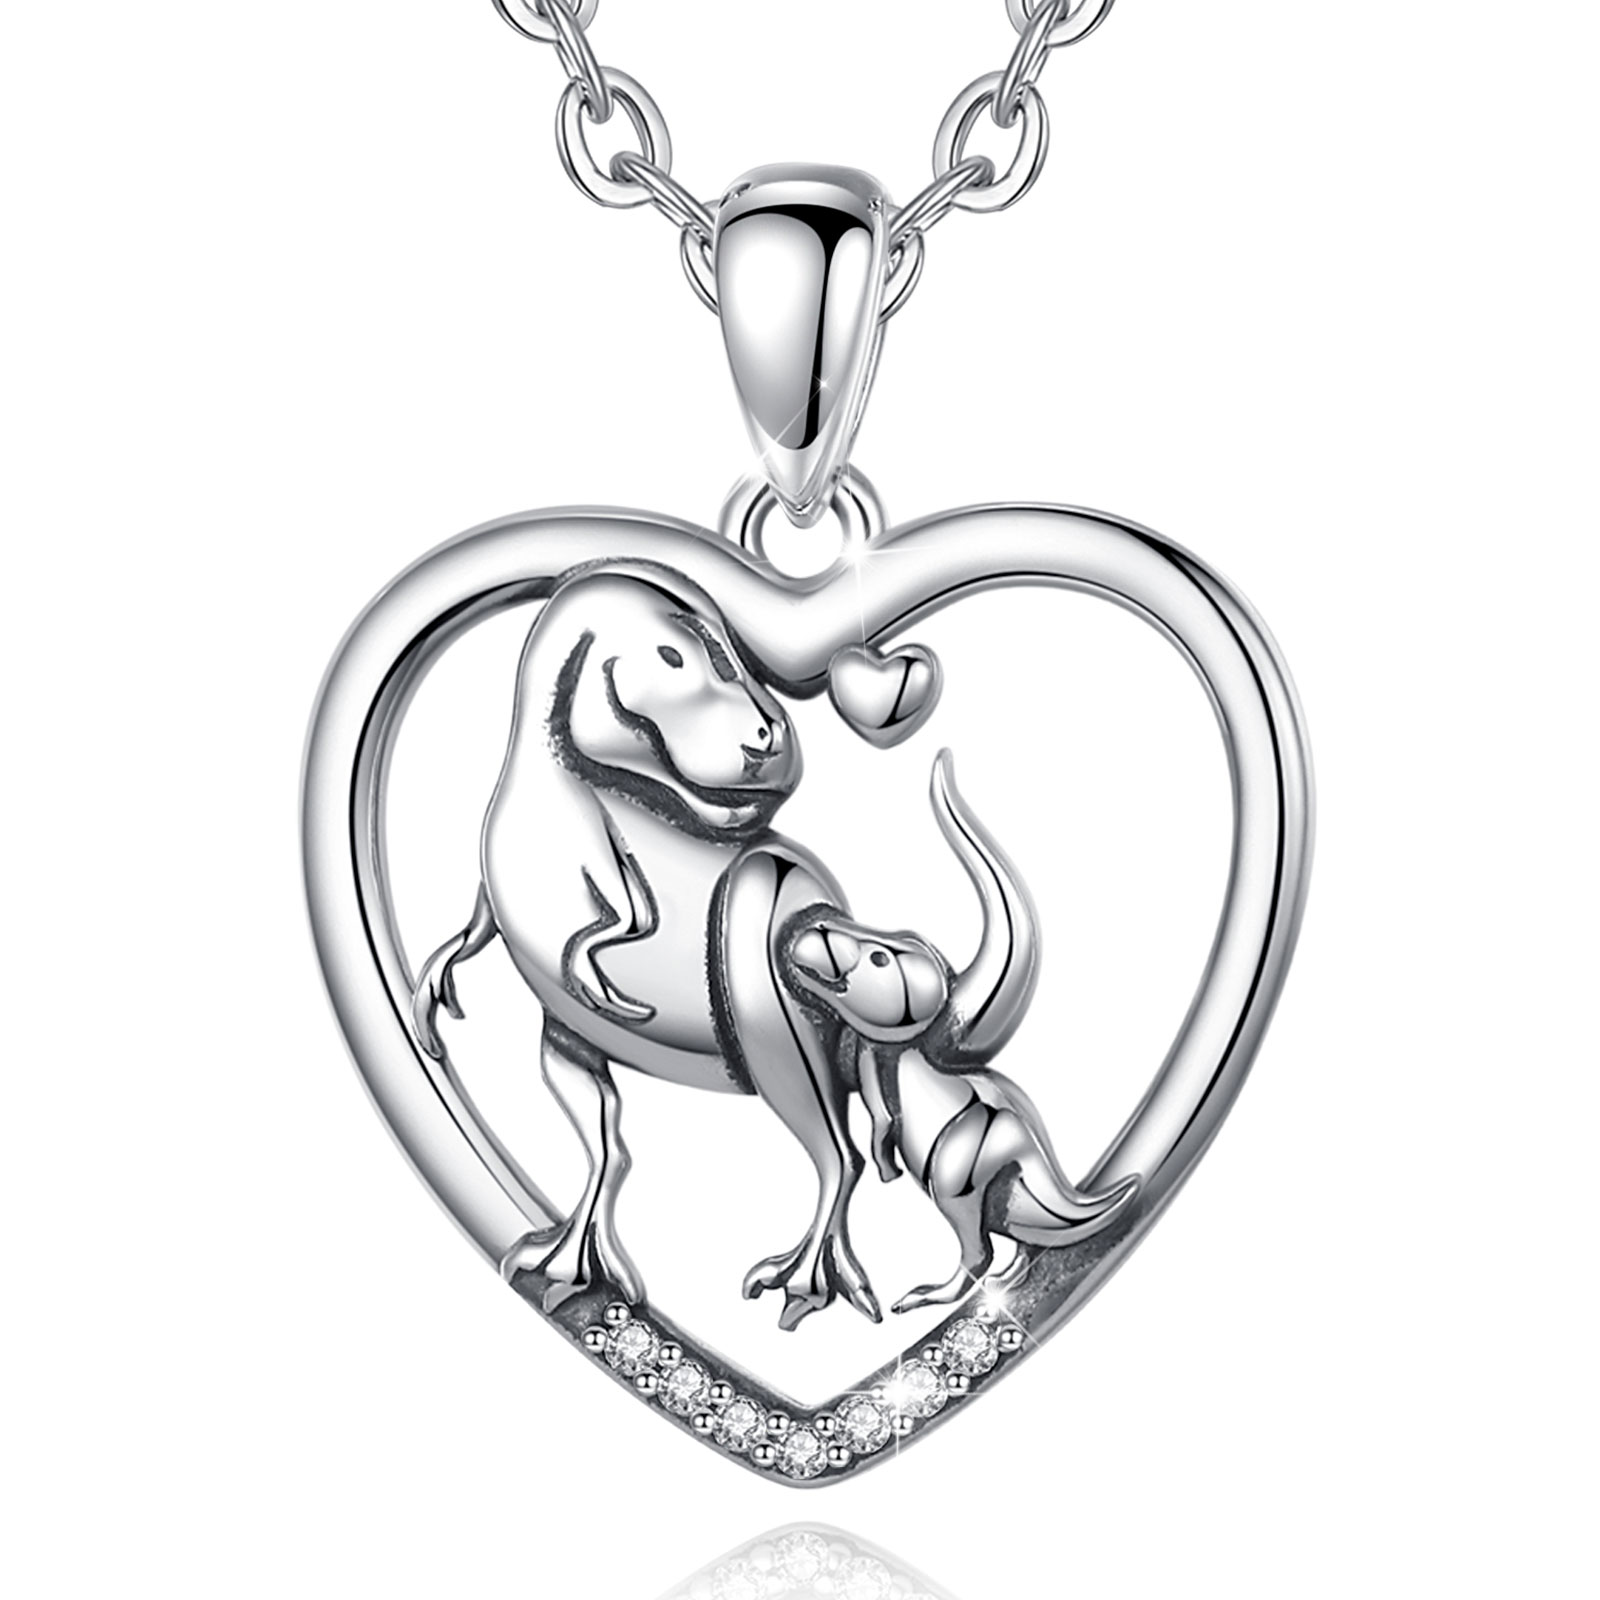 Merryshine 925 sterling silver heart shaped megatron dinosaur necklace for mom